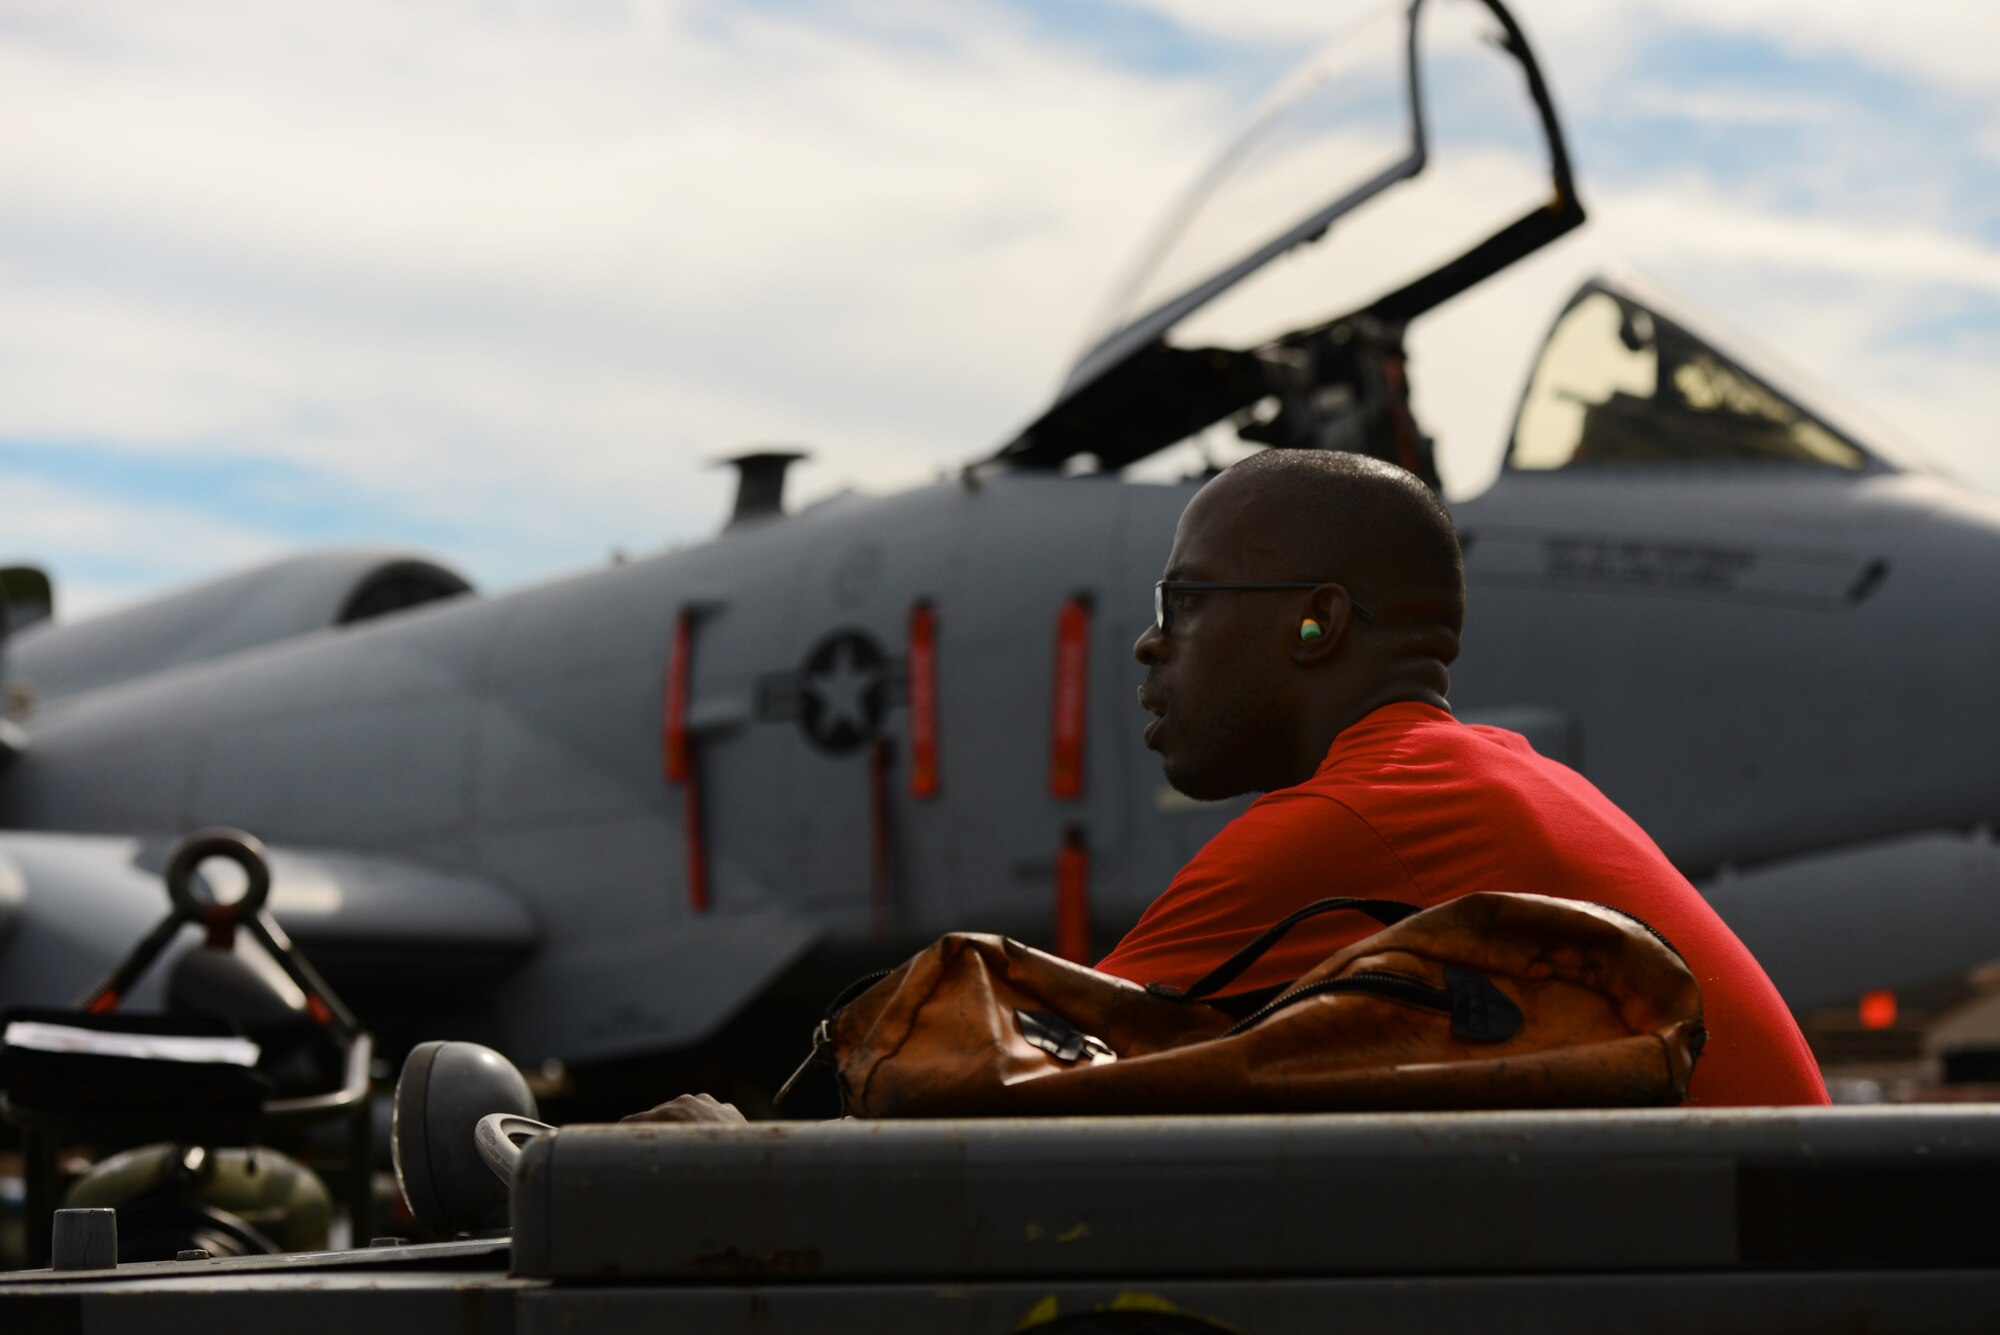 U.S. Air Force Airman 1st Class Jean Moise-Morel, 36th Aircraft Maintenance Unit weapons loader, runs the loader for the winning team during the quarterly competition held at Osan Air Base, Republic of Korea, July 10, 2015. The event adds an element of competition to a qualification test for the technicians; competitors must complete a written test and a practical demonstration of skill within a fixed amount of time in order to maintain mission readiness status. (U.S. Air Force photo by Staff Sgt. Amber Grimm/Released)